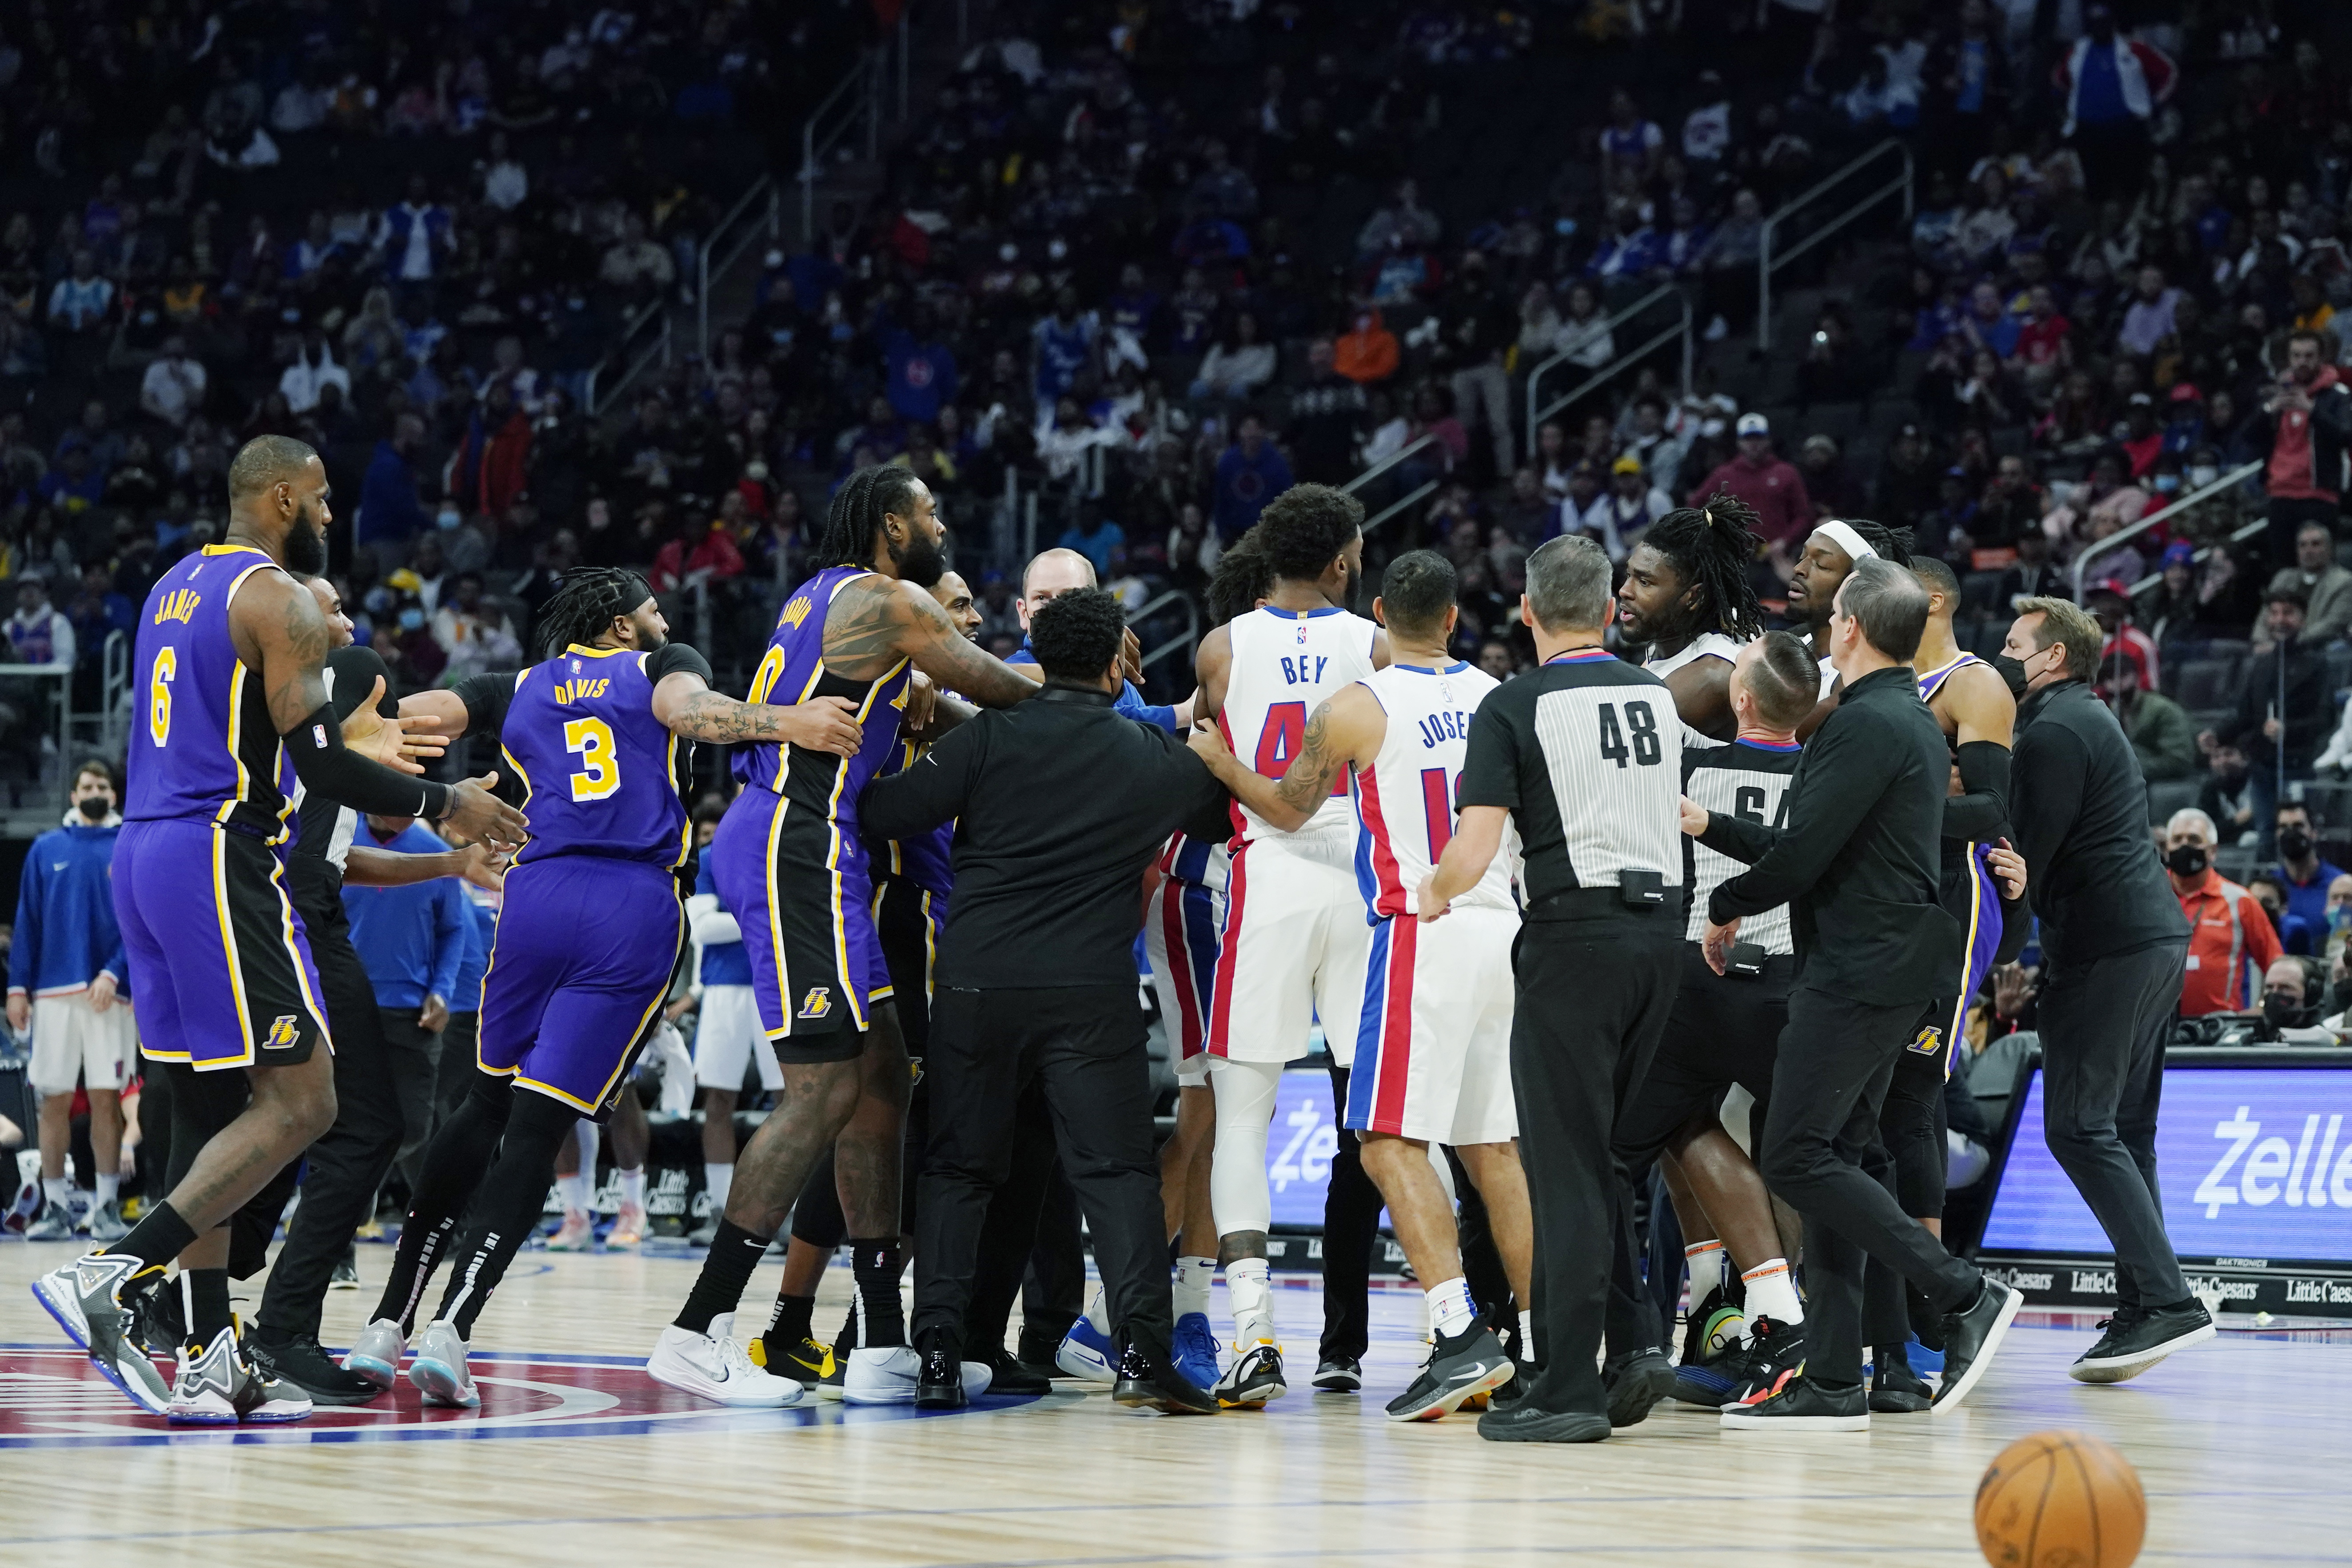 One cup thrown leads to infamous Malice at the Palace